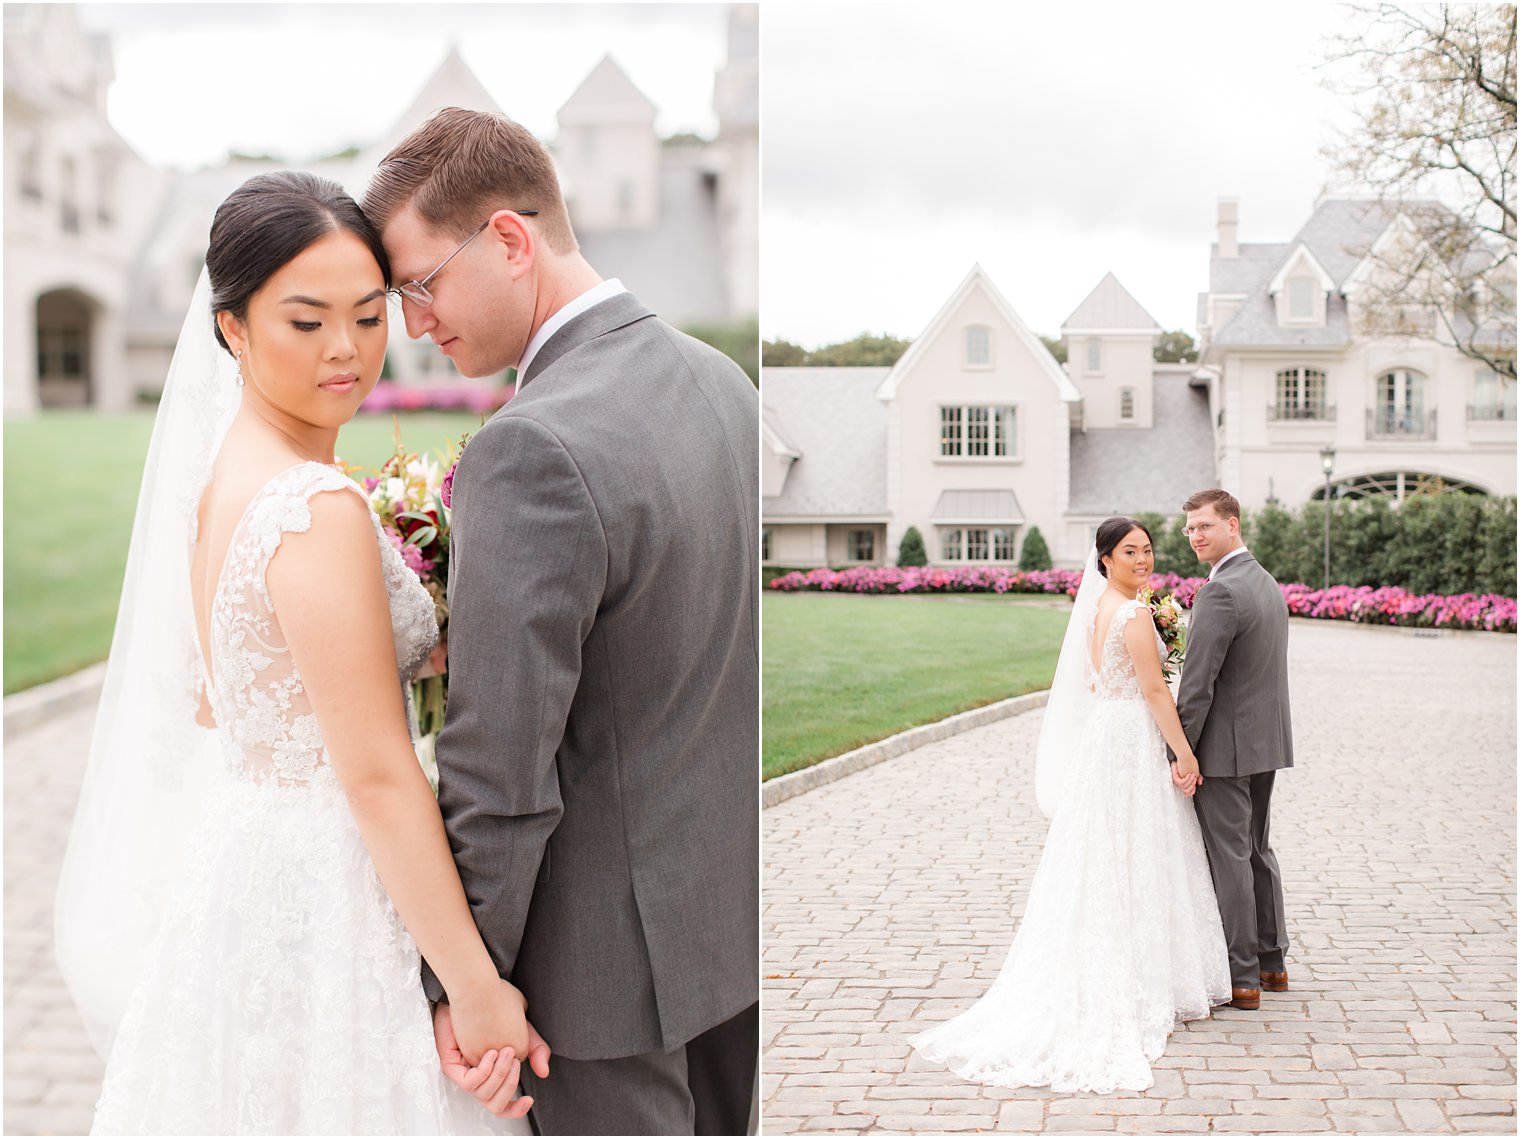 Romantic bride and groom photos at Park Chateau Estate